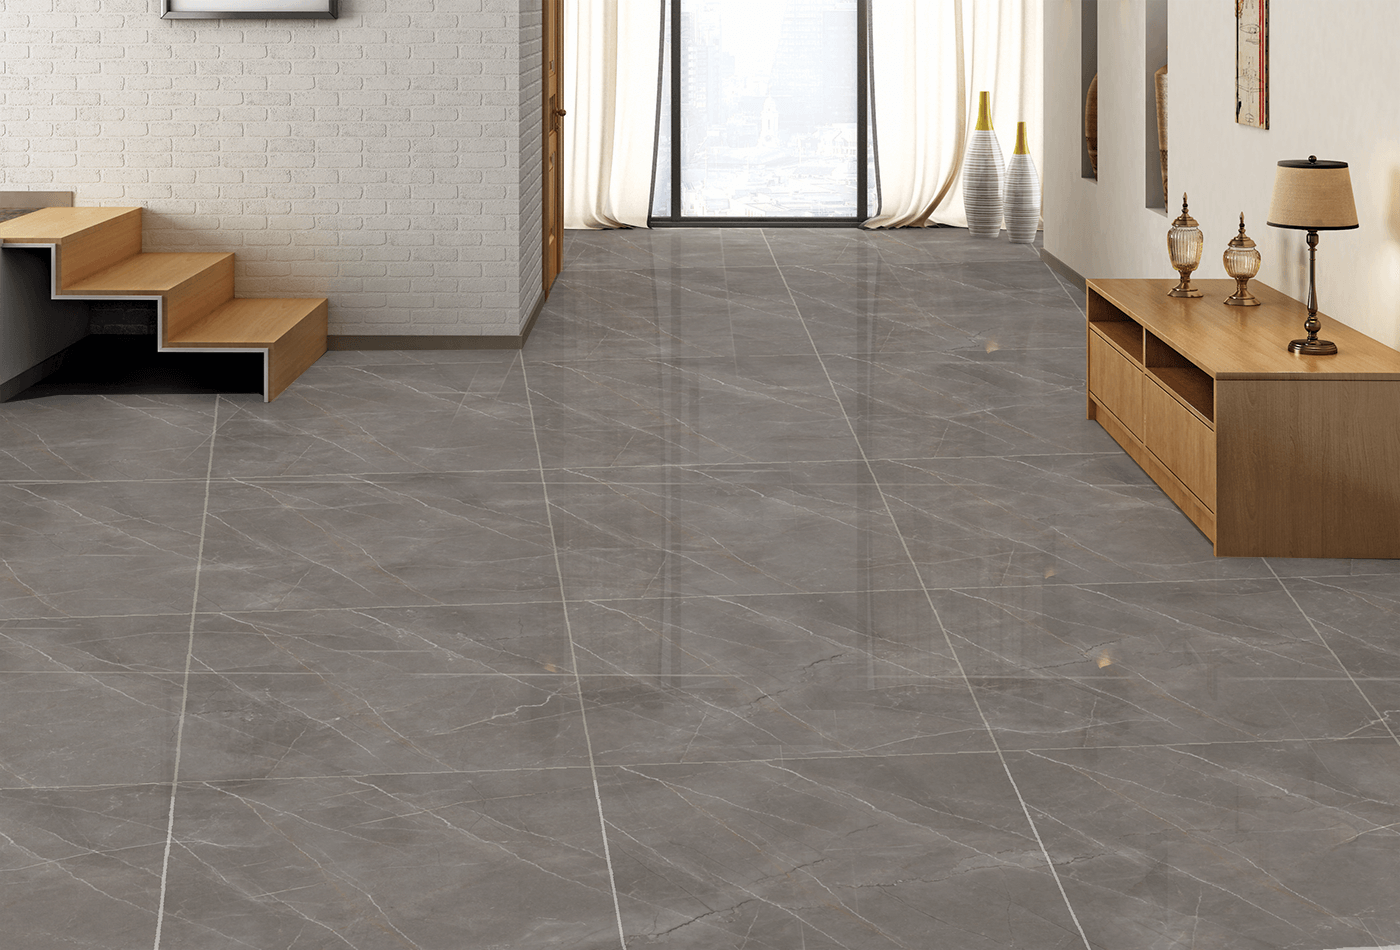 Why are Brown Porcelain Tiles the Best Choice for Your Home